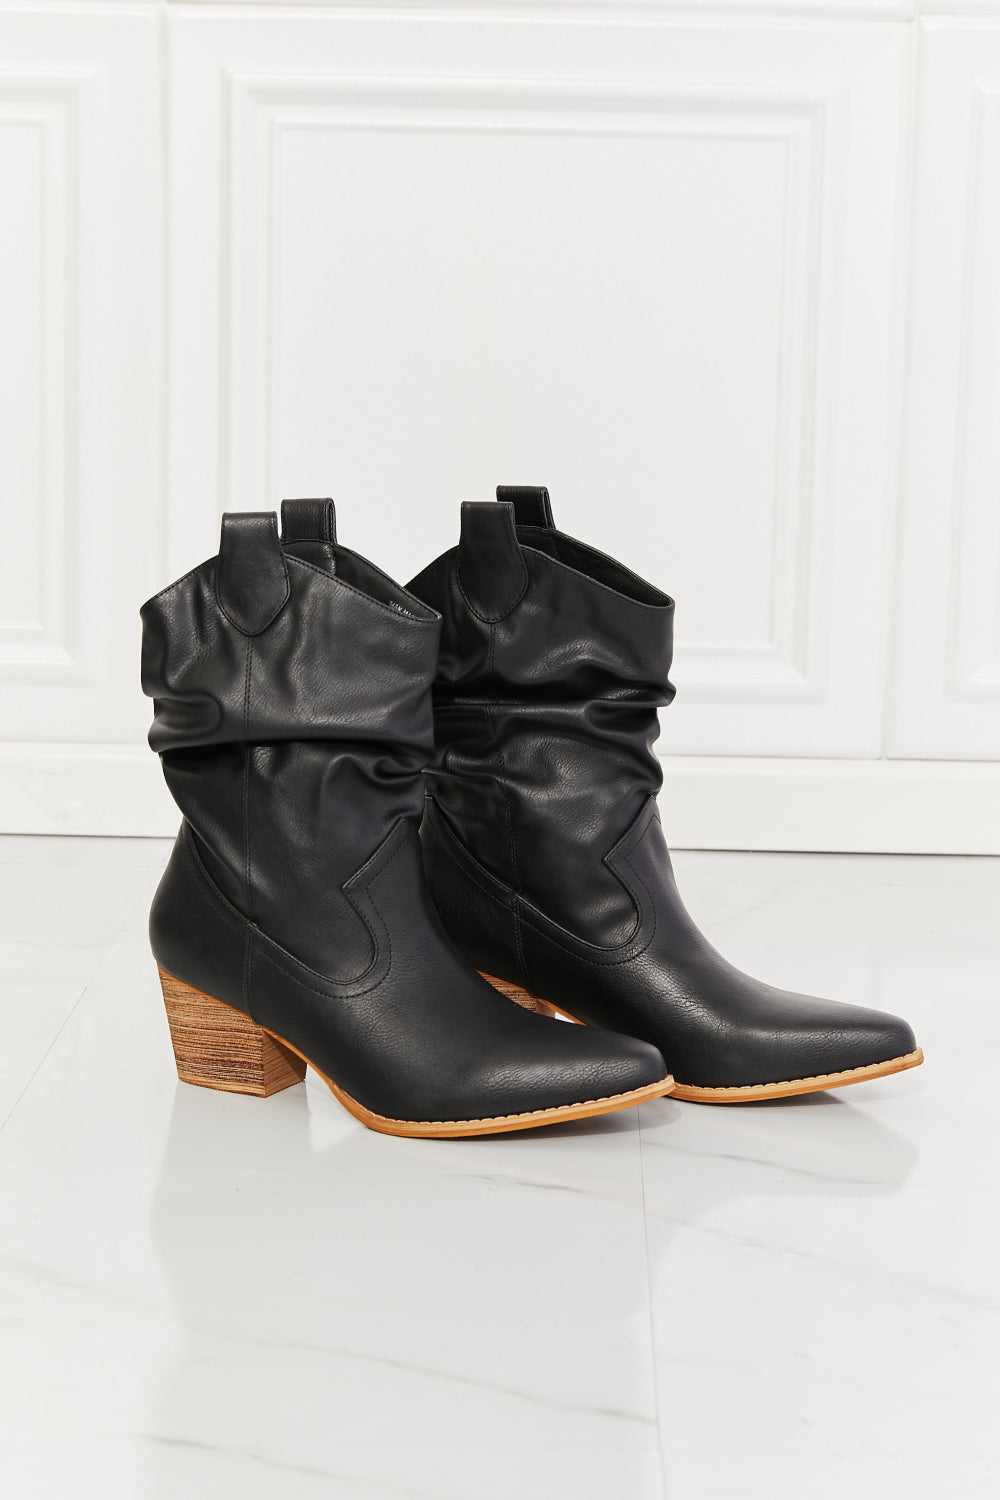 Better in Texas Scrunch Cowboy Boots in Black - Southern Soul Collectives